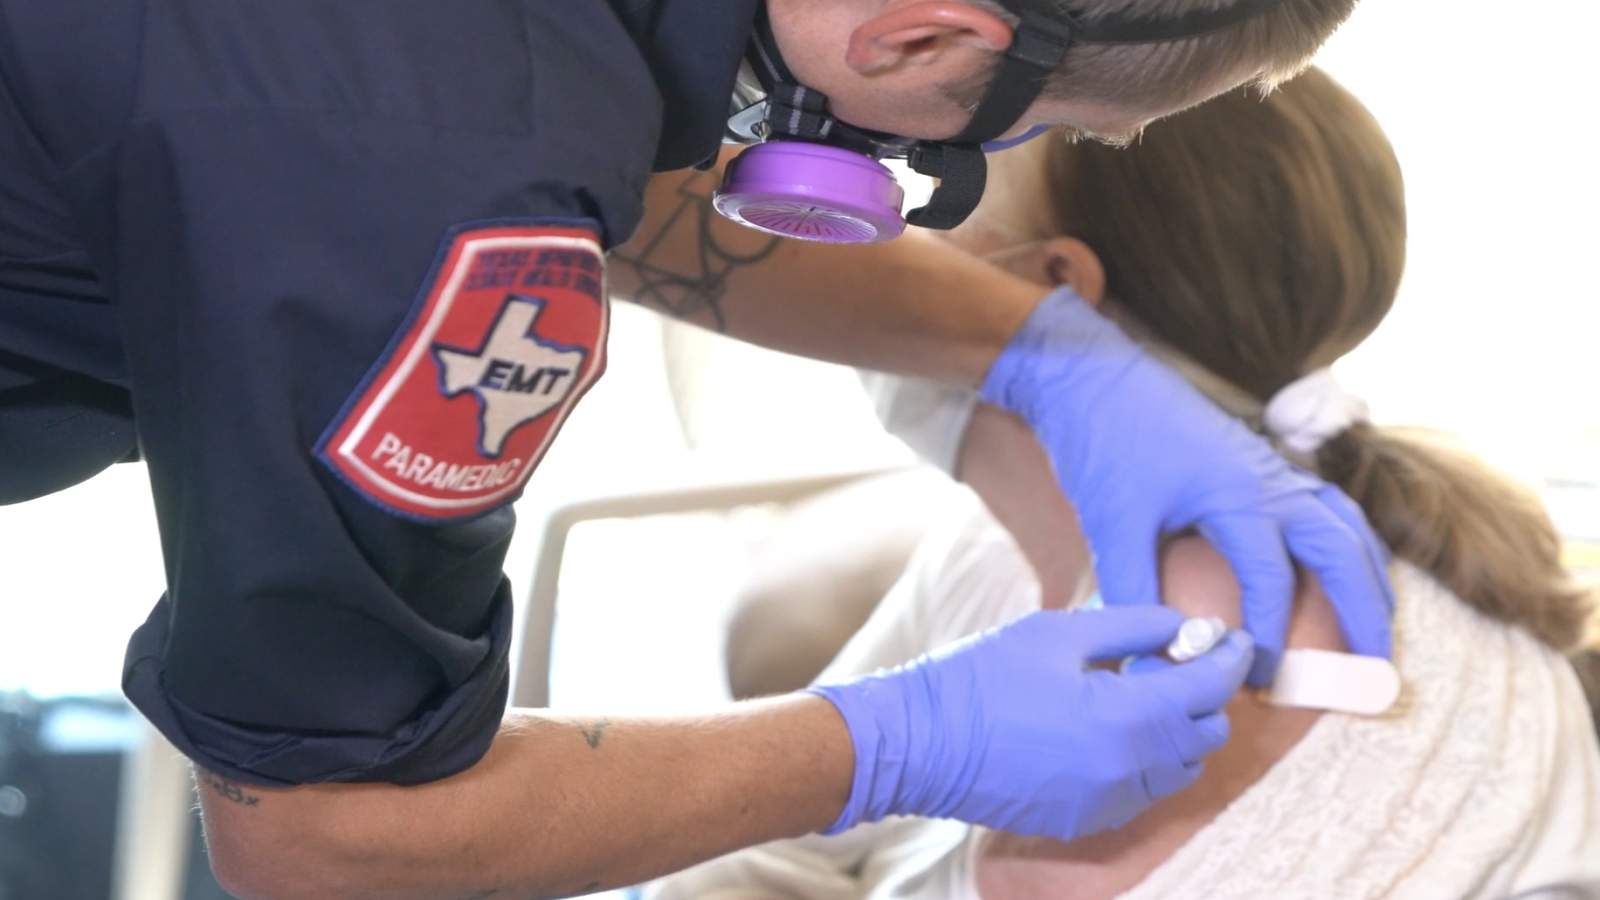 WATCH: Homebound seniors receive COVID-19 vaccine from SAFD